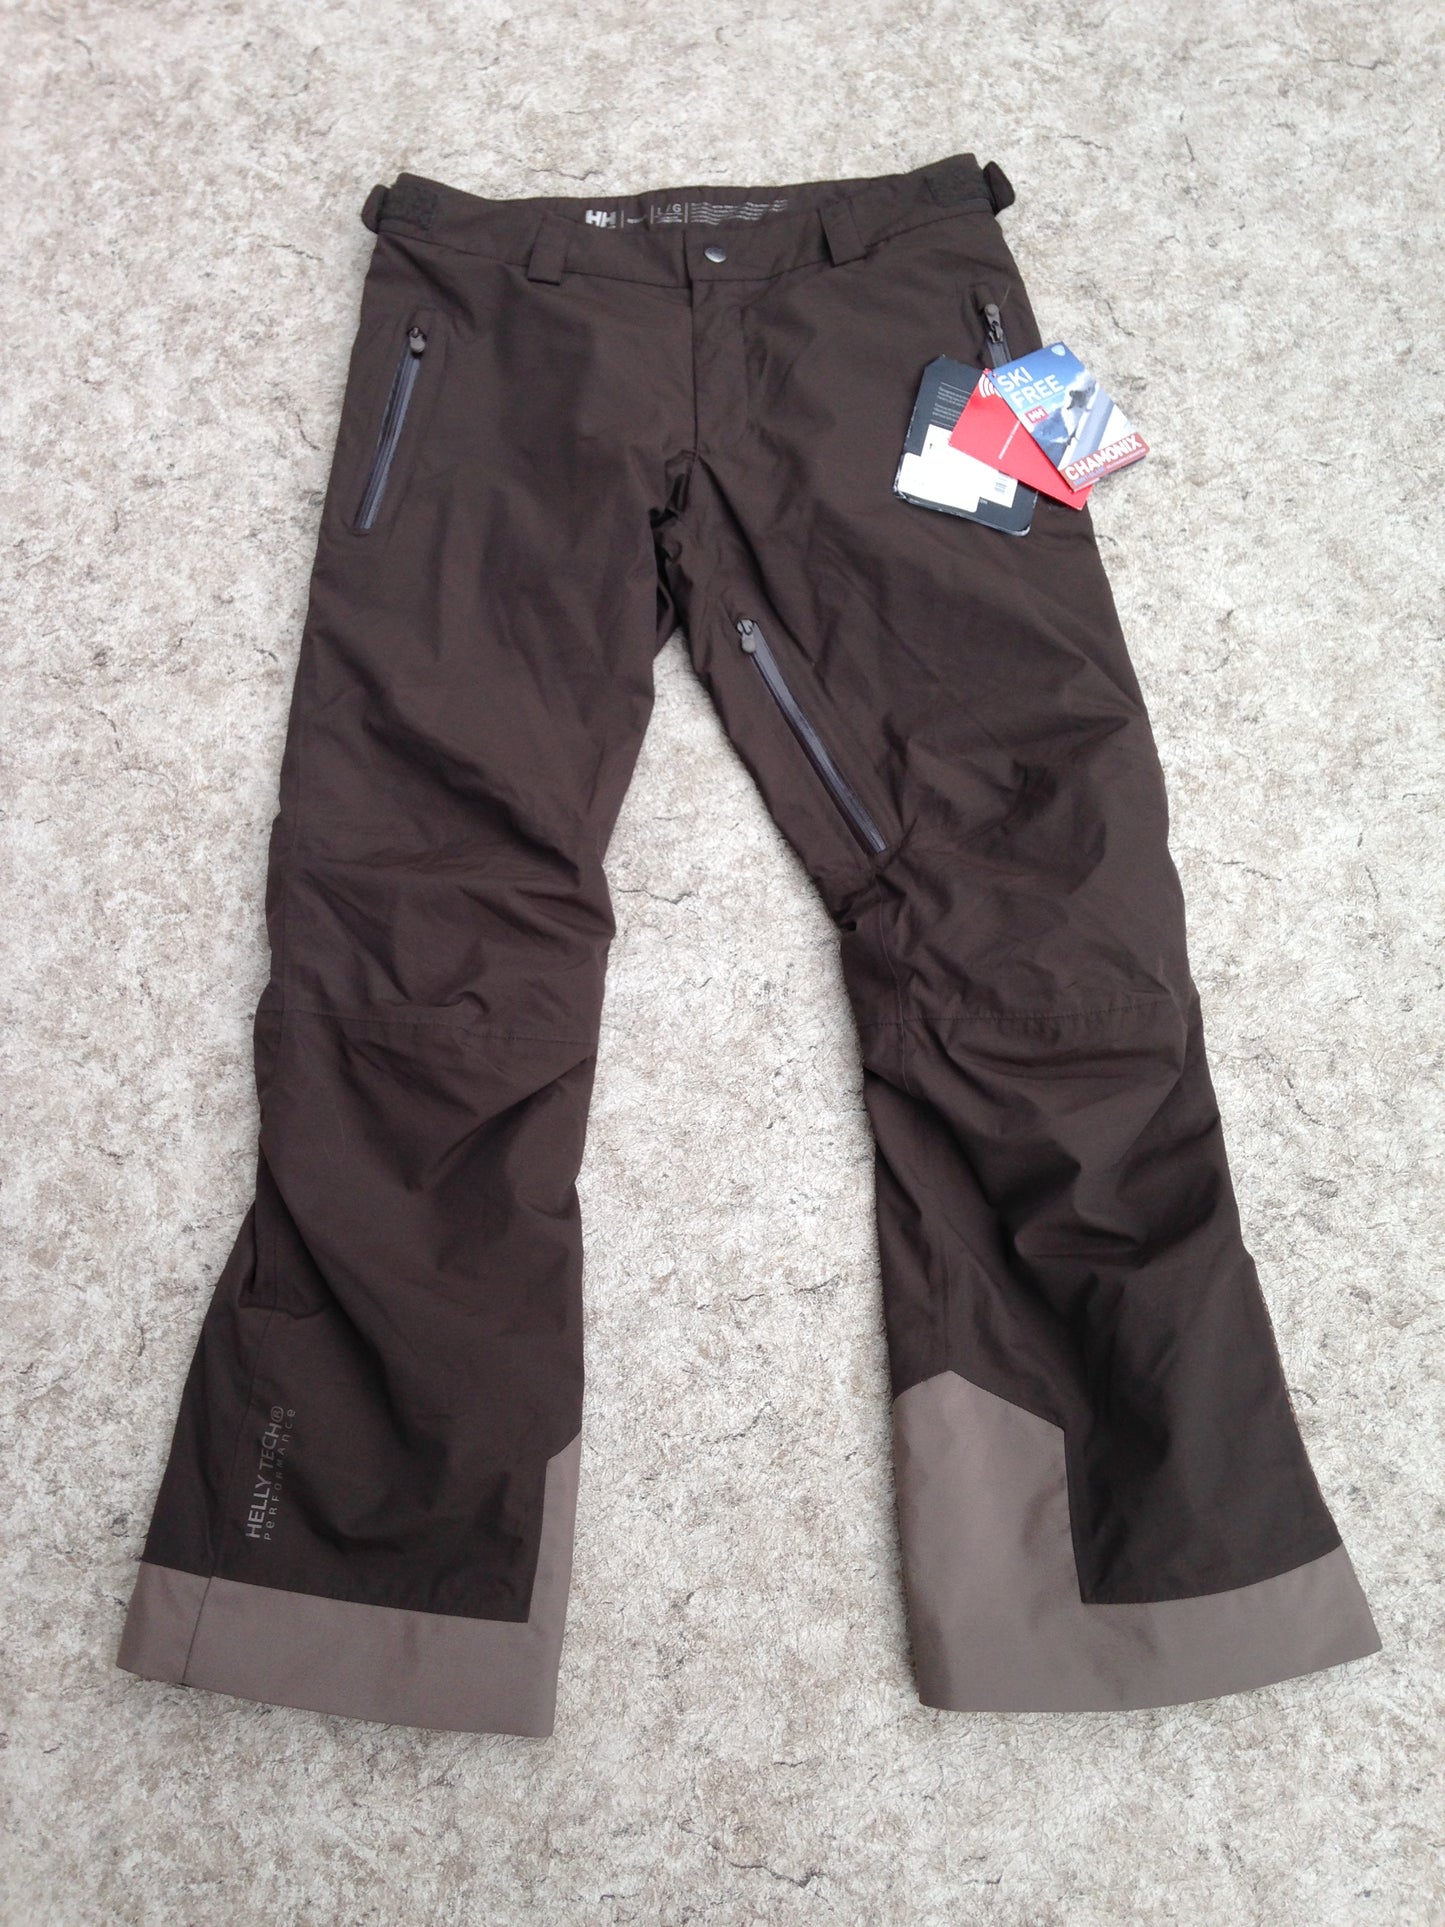 Snow Pants Men's Size Medium Helly Hansen Legend Cocoa Waterproof New With Tags